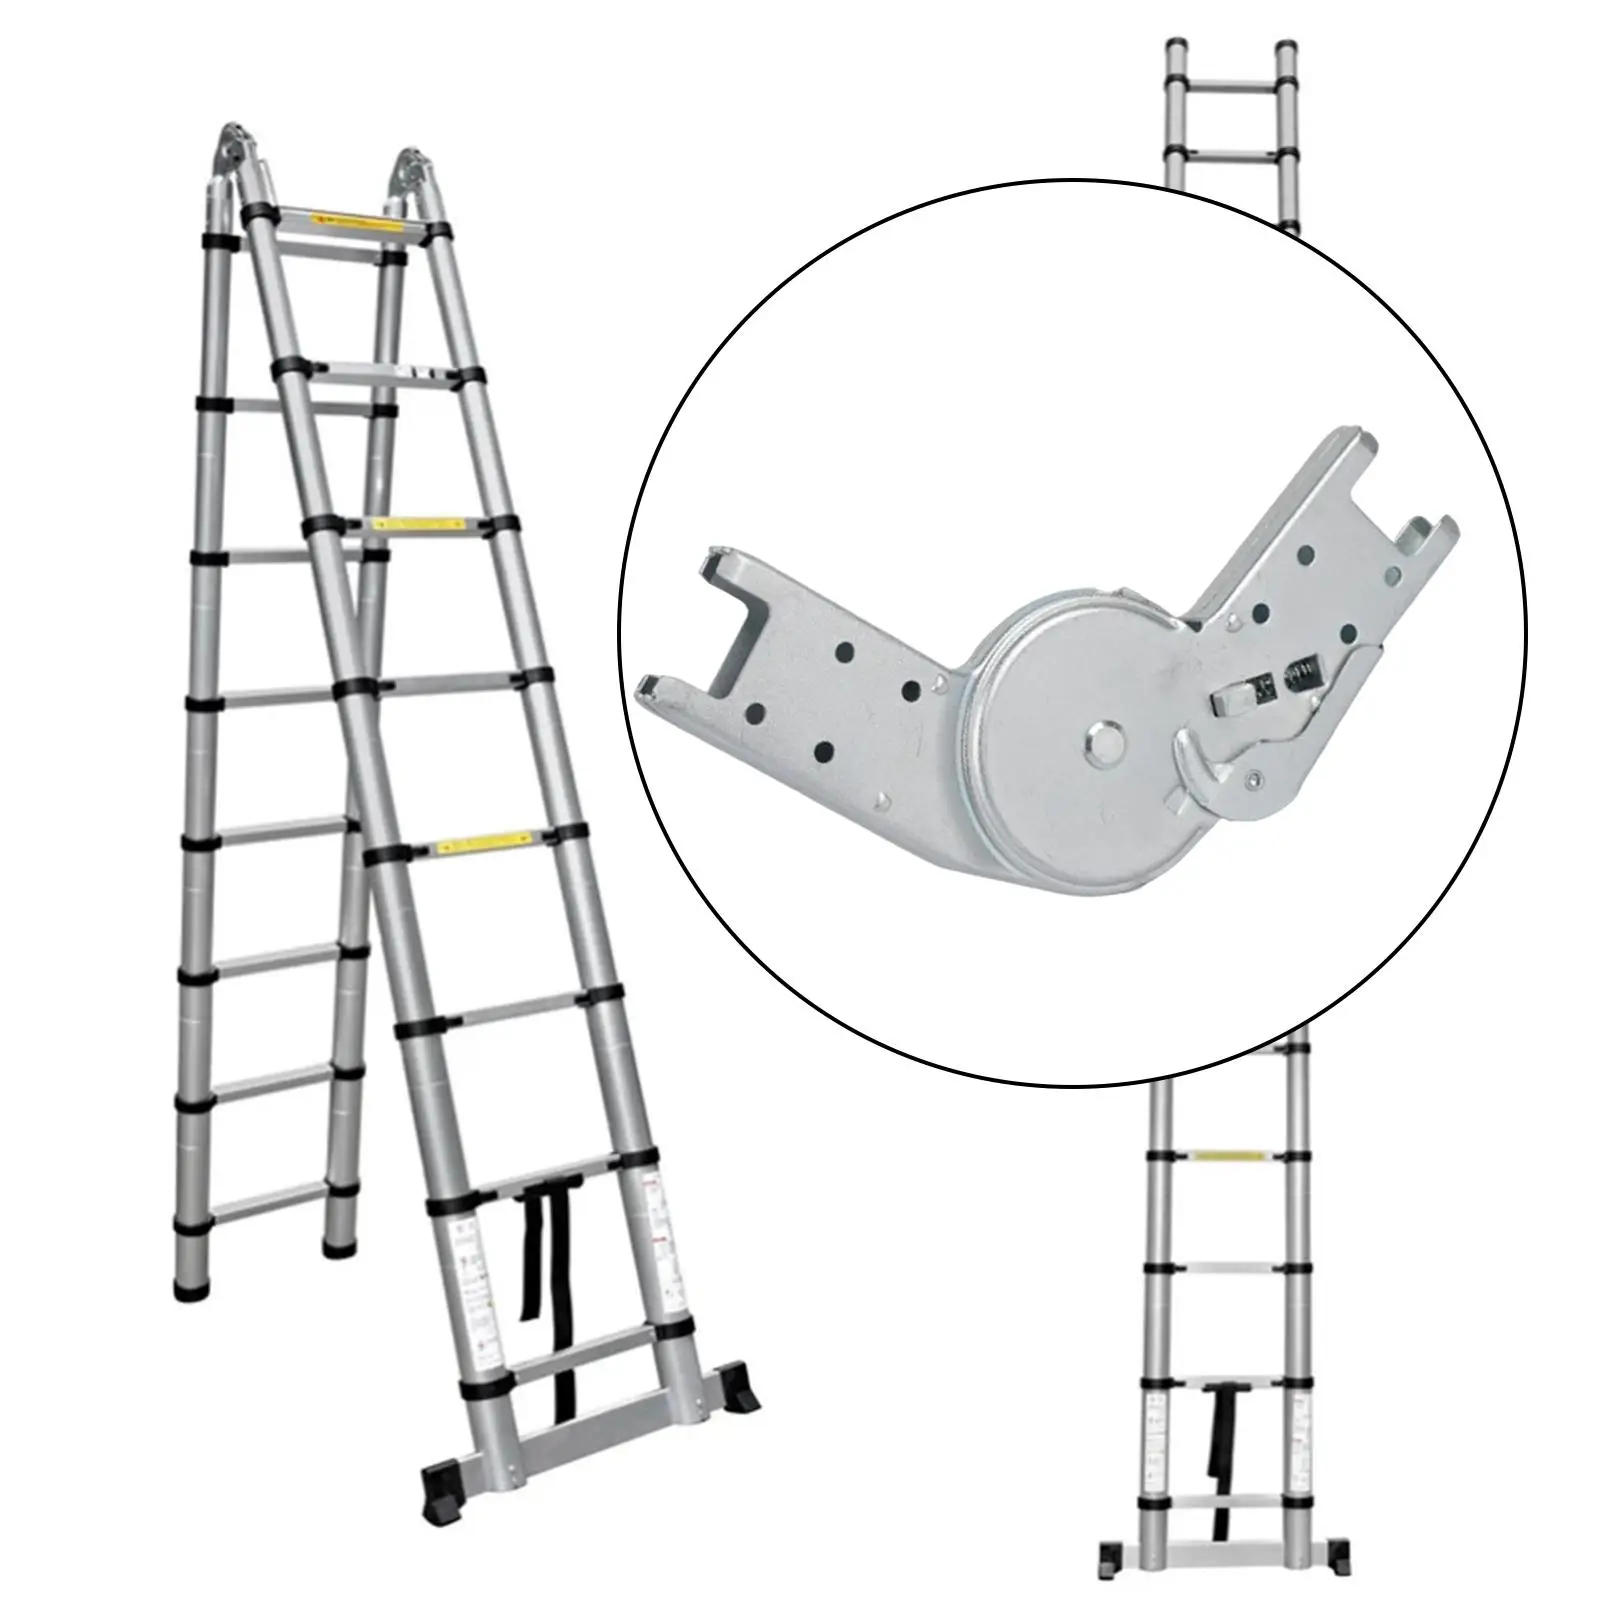 Adjustable Ladder Joint Replacement, Connecting Bracket Hinge, Collapsible